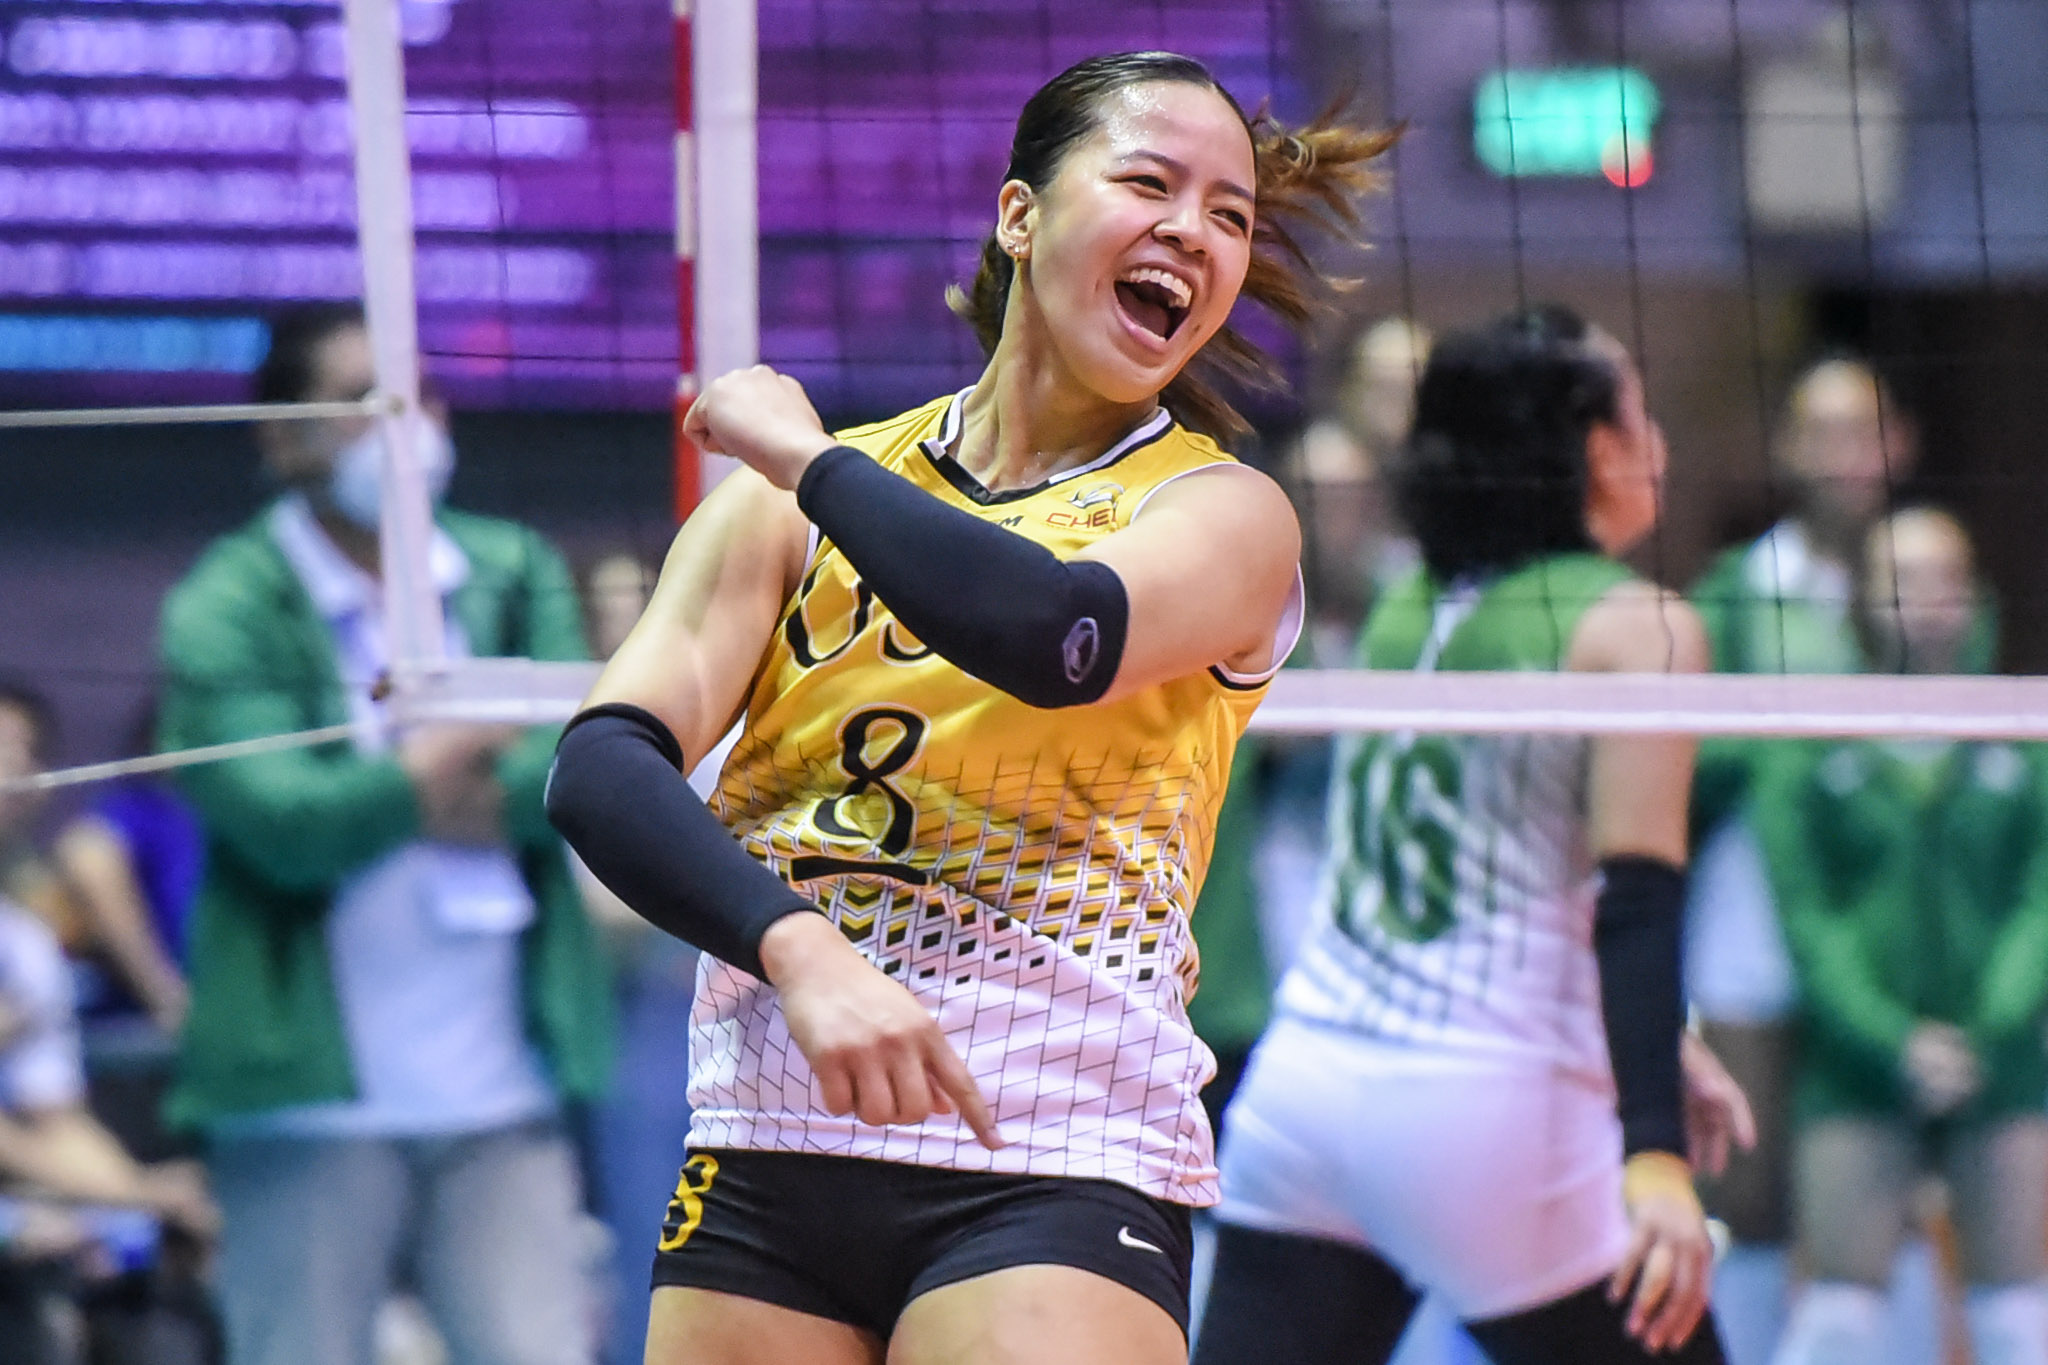 Laure, UST hand La Salle first loss in bounce back win